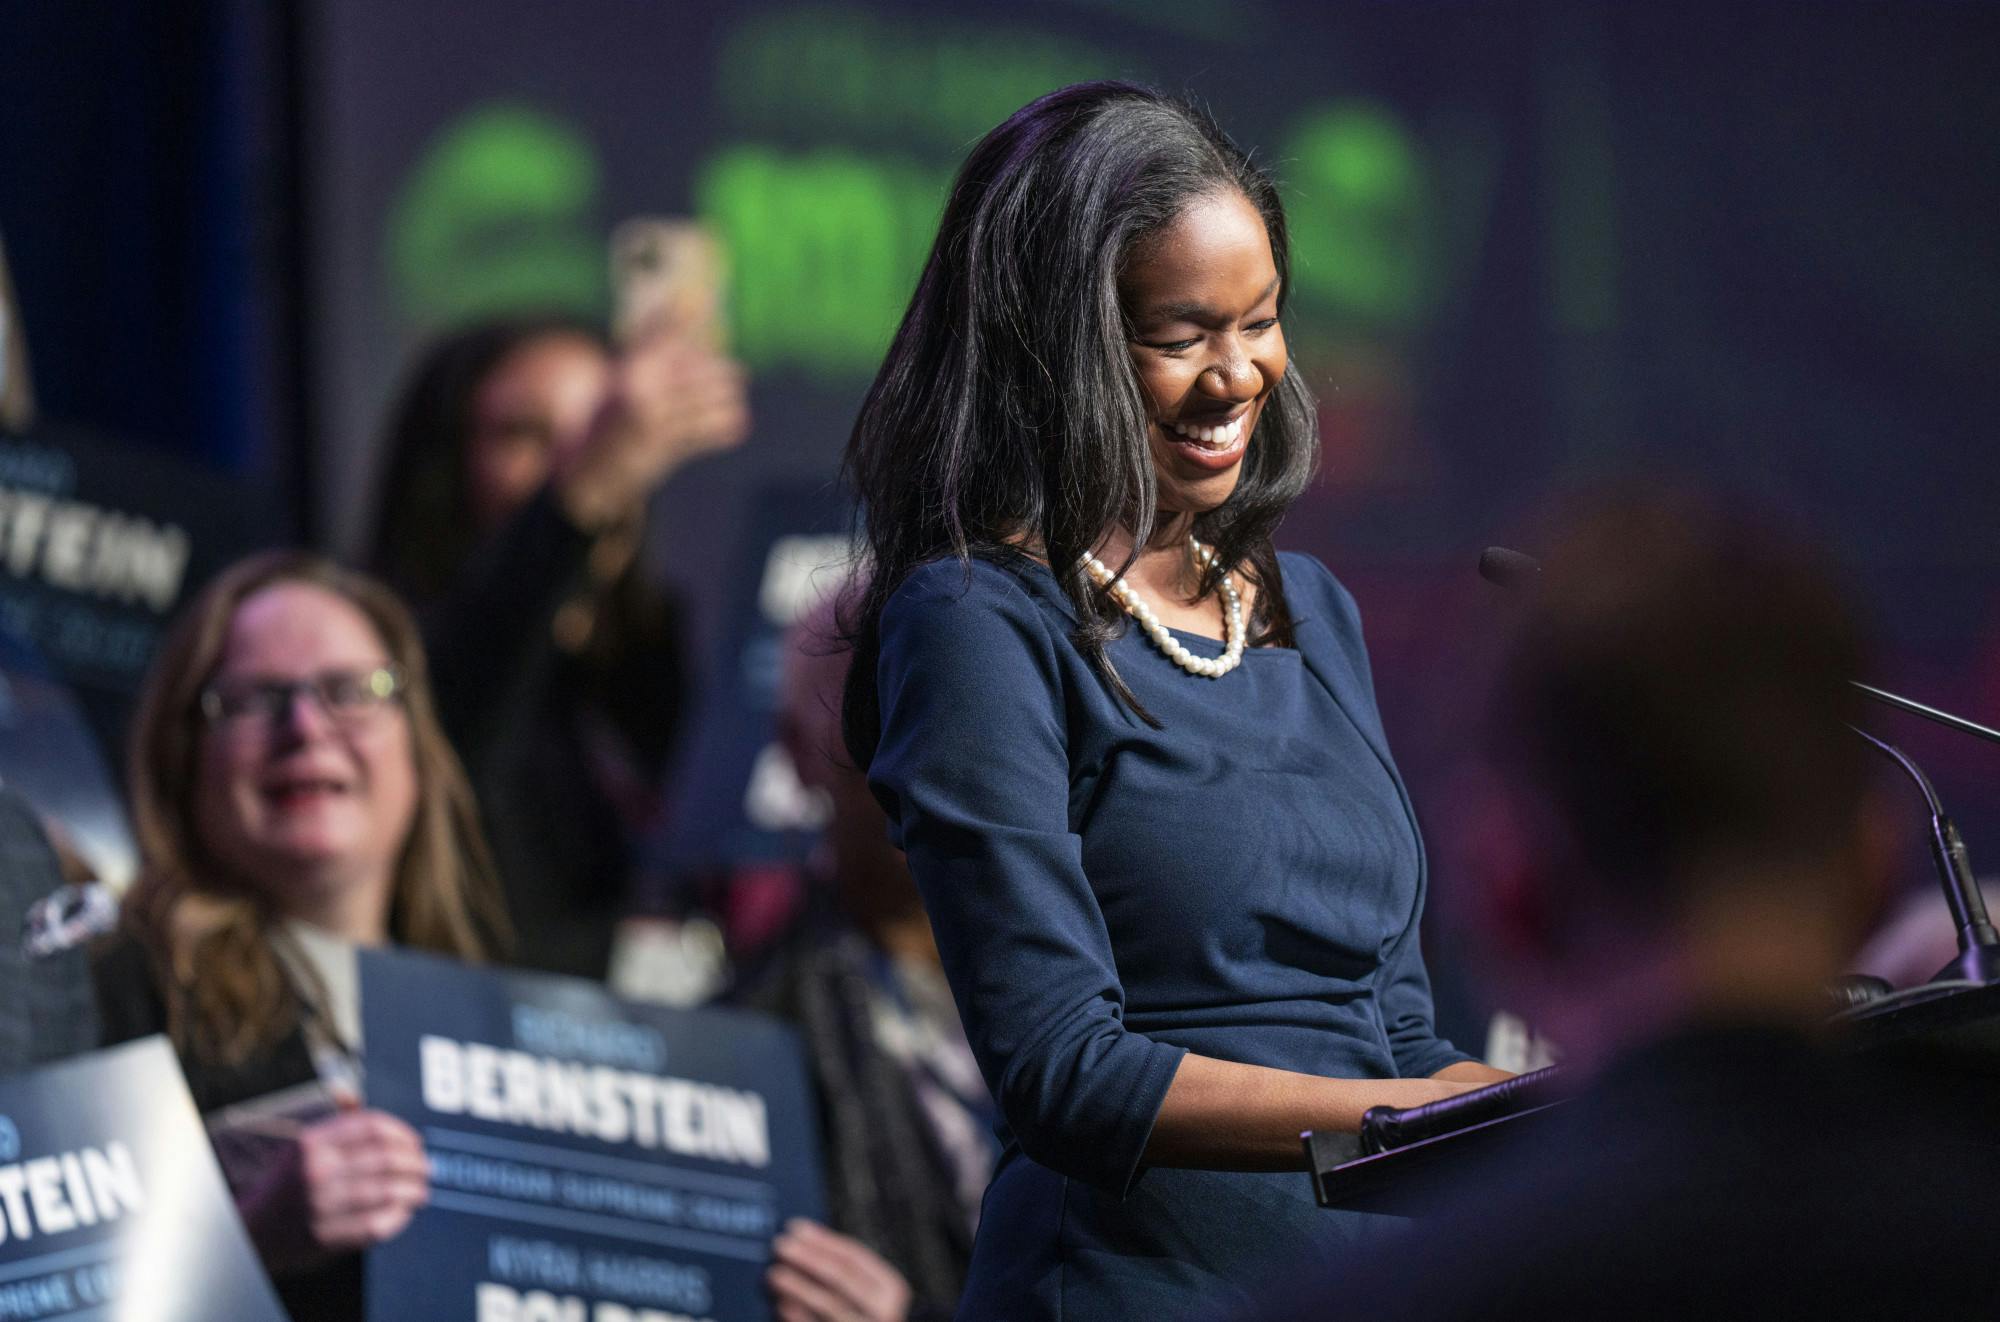 <p>Michigan Supreme Court candidate and current State Rep. Kyra Harris Bolden at the 2022 State Endorsement Convention for the Michigan Democratic Party at the TCF Convention Center. - April 9, 2022</p>